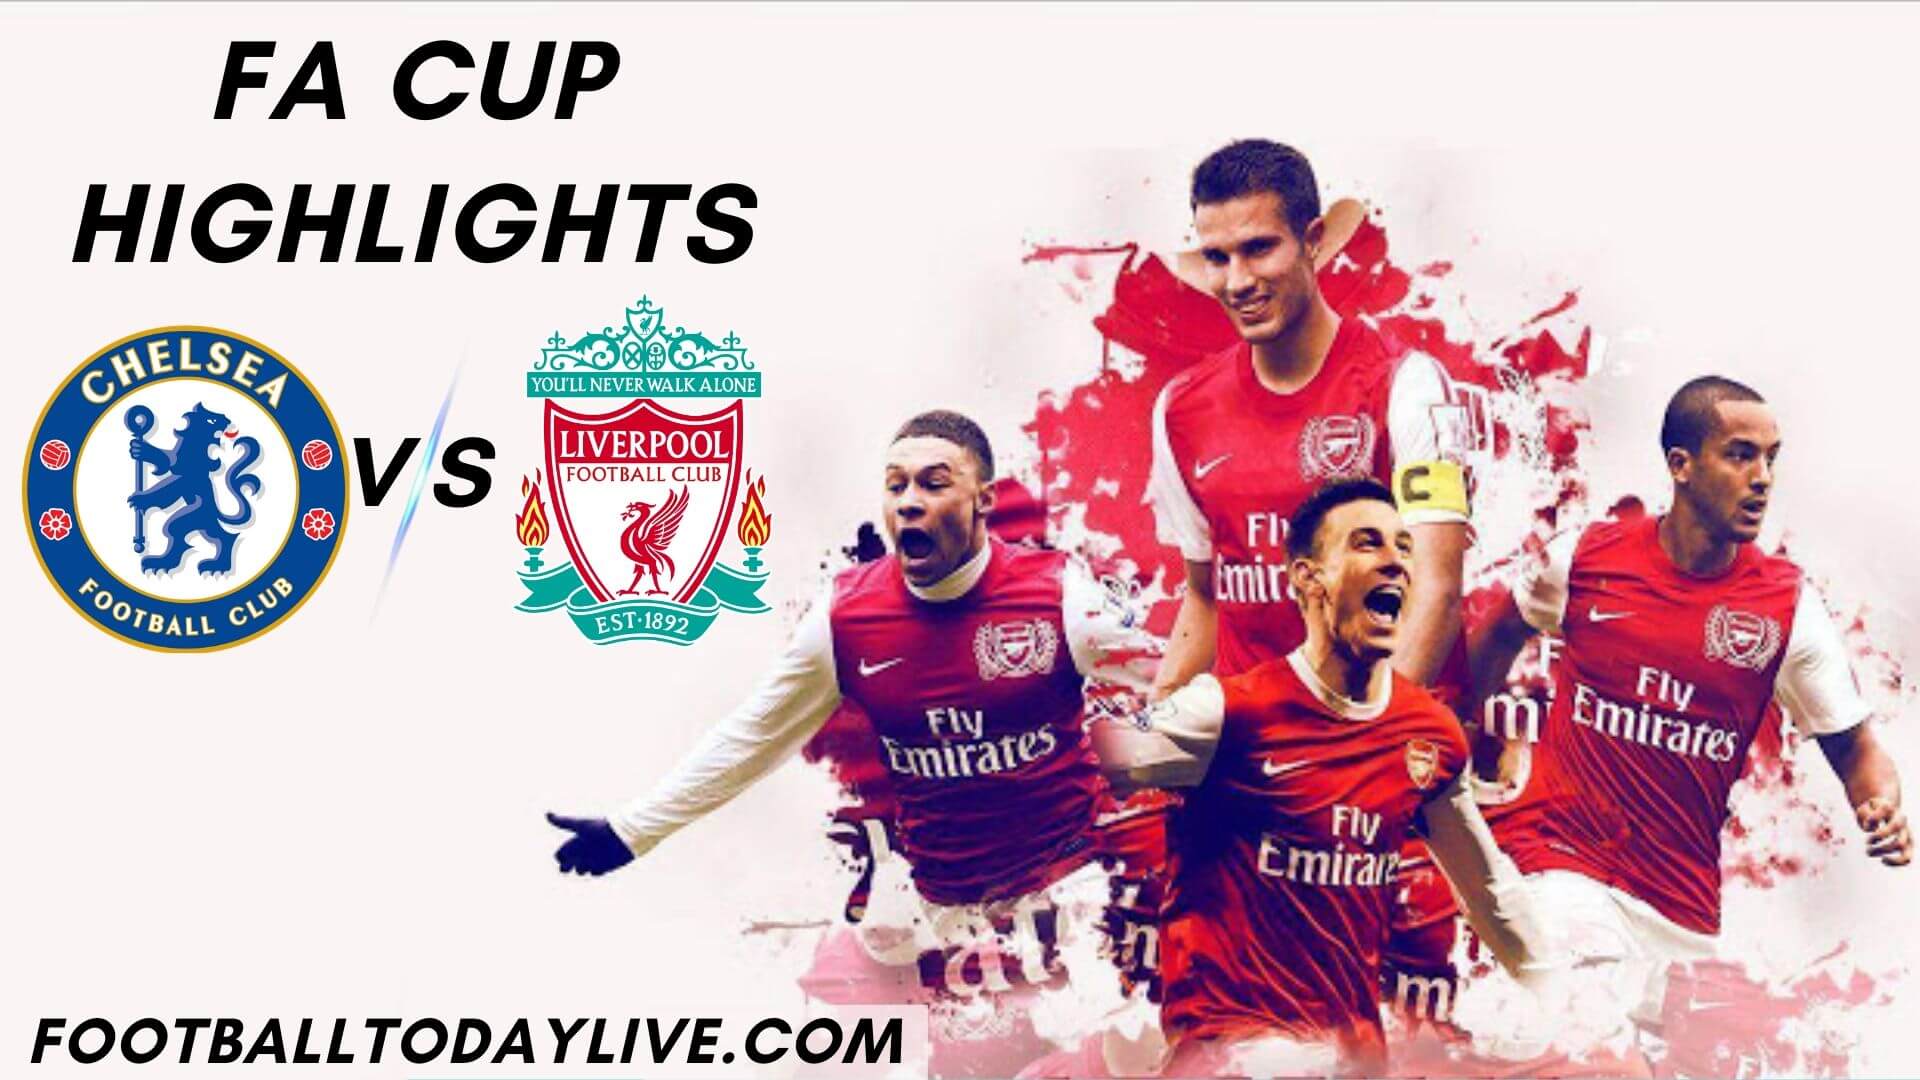 Chelsea Vs Liverpool Highlights Rd 5 FA Cup 2020